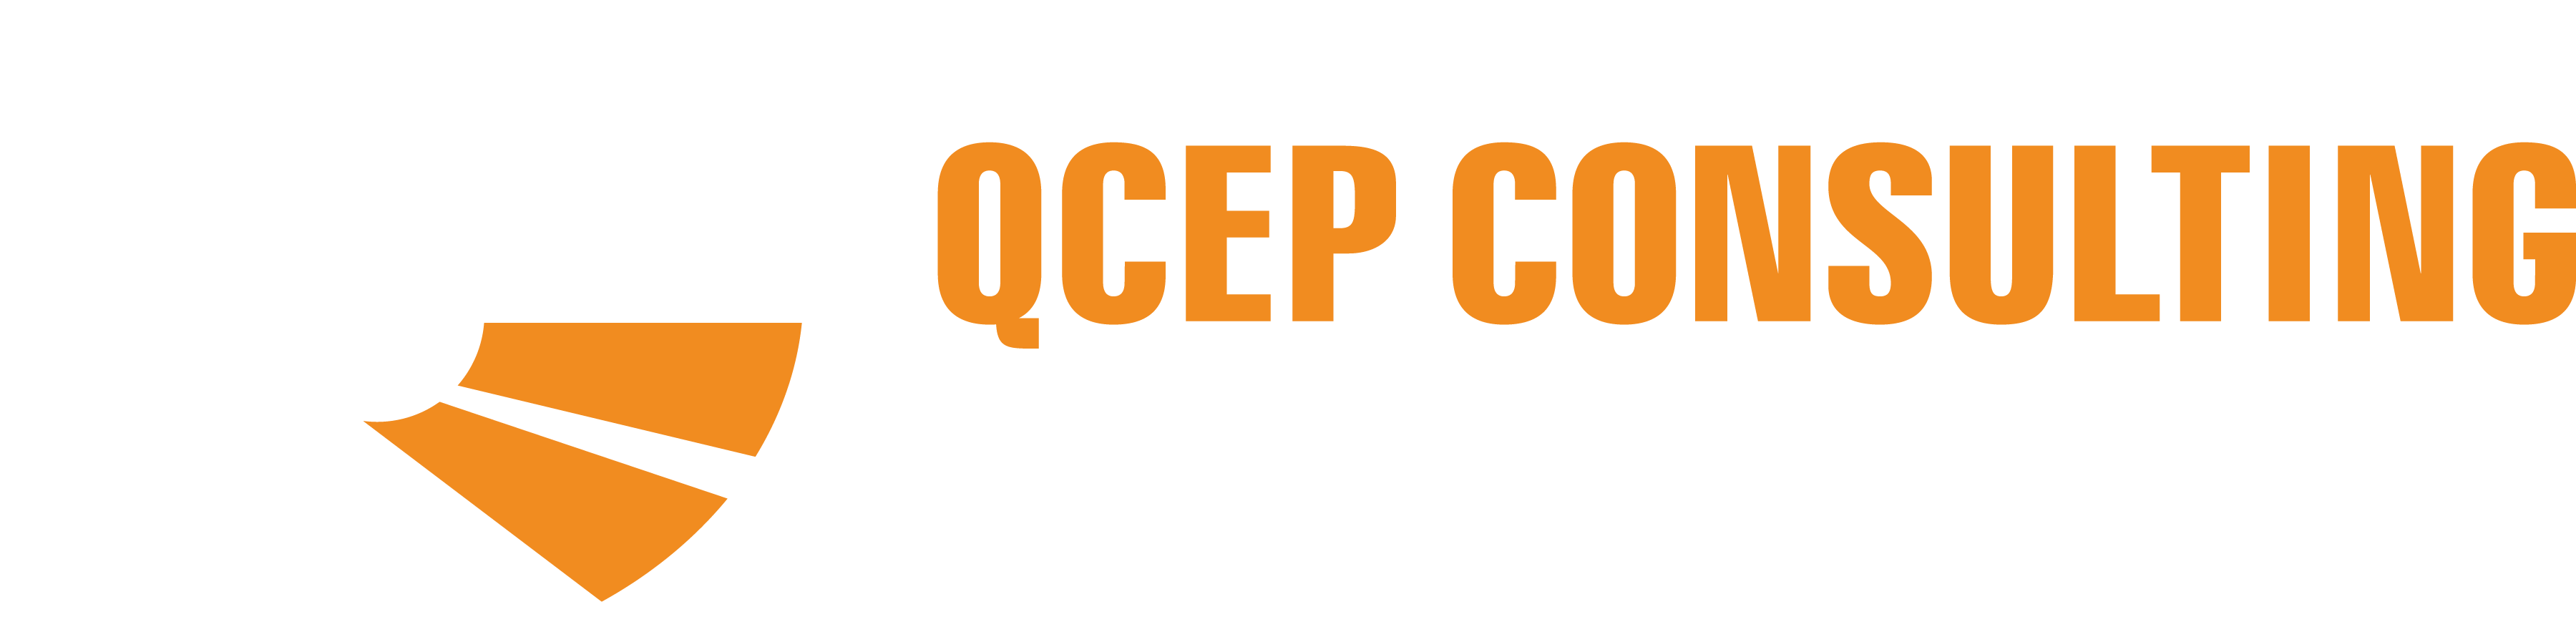 QCEP Consulting